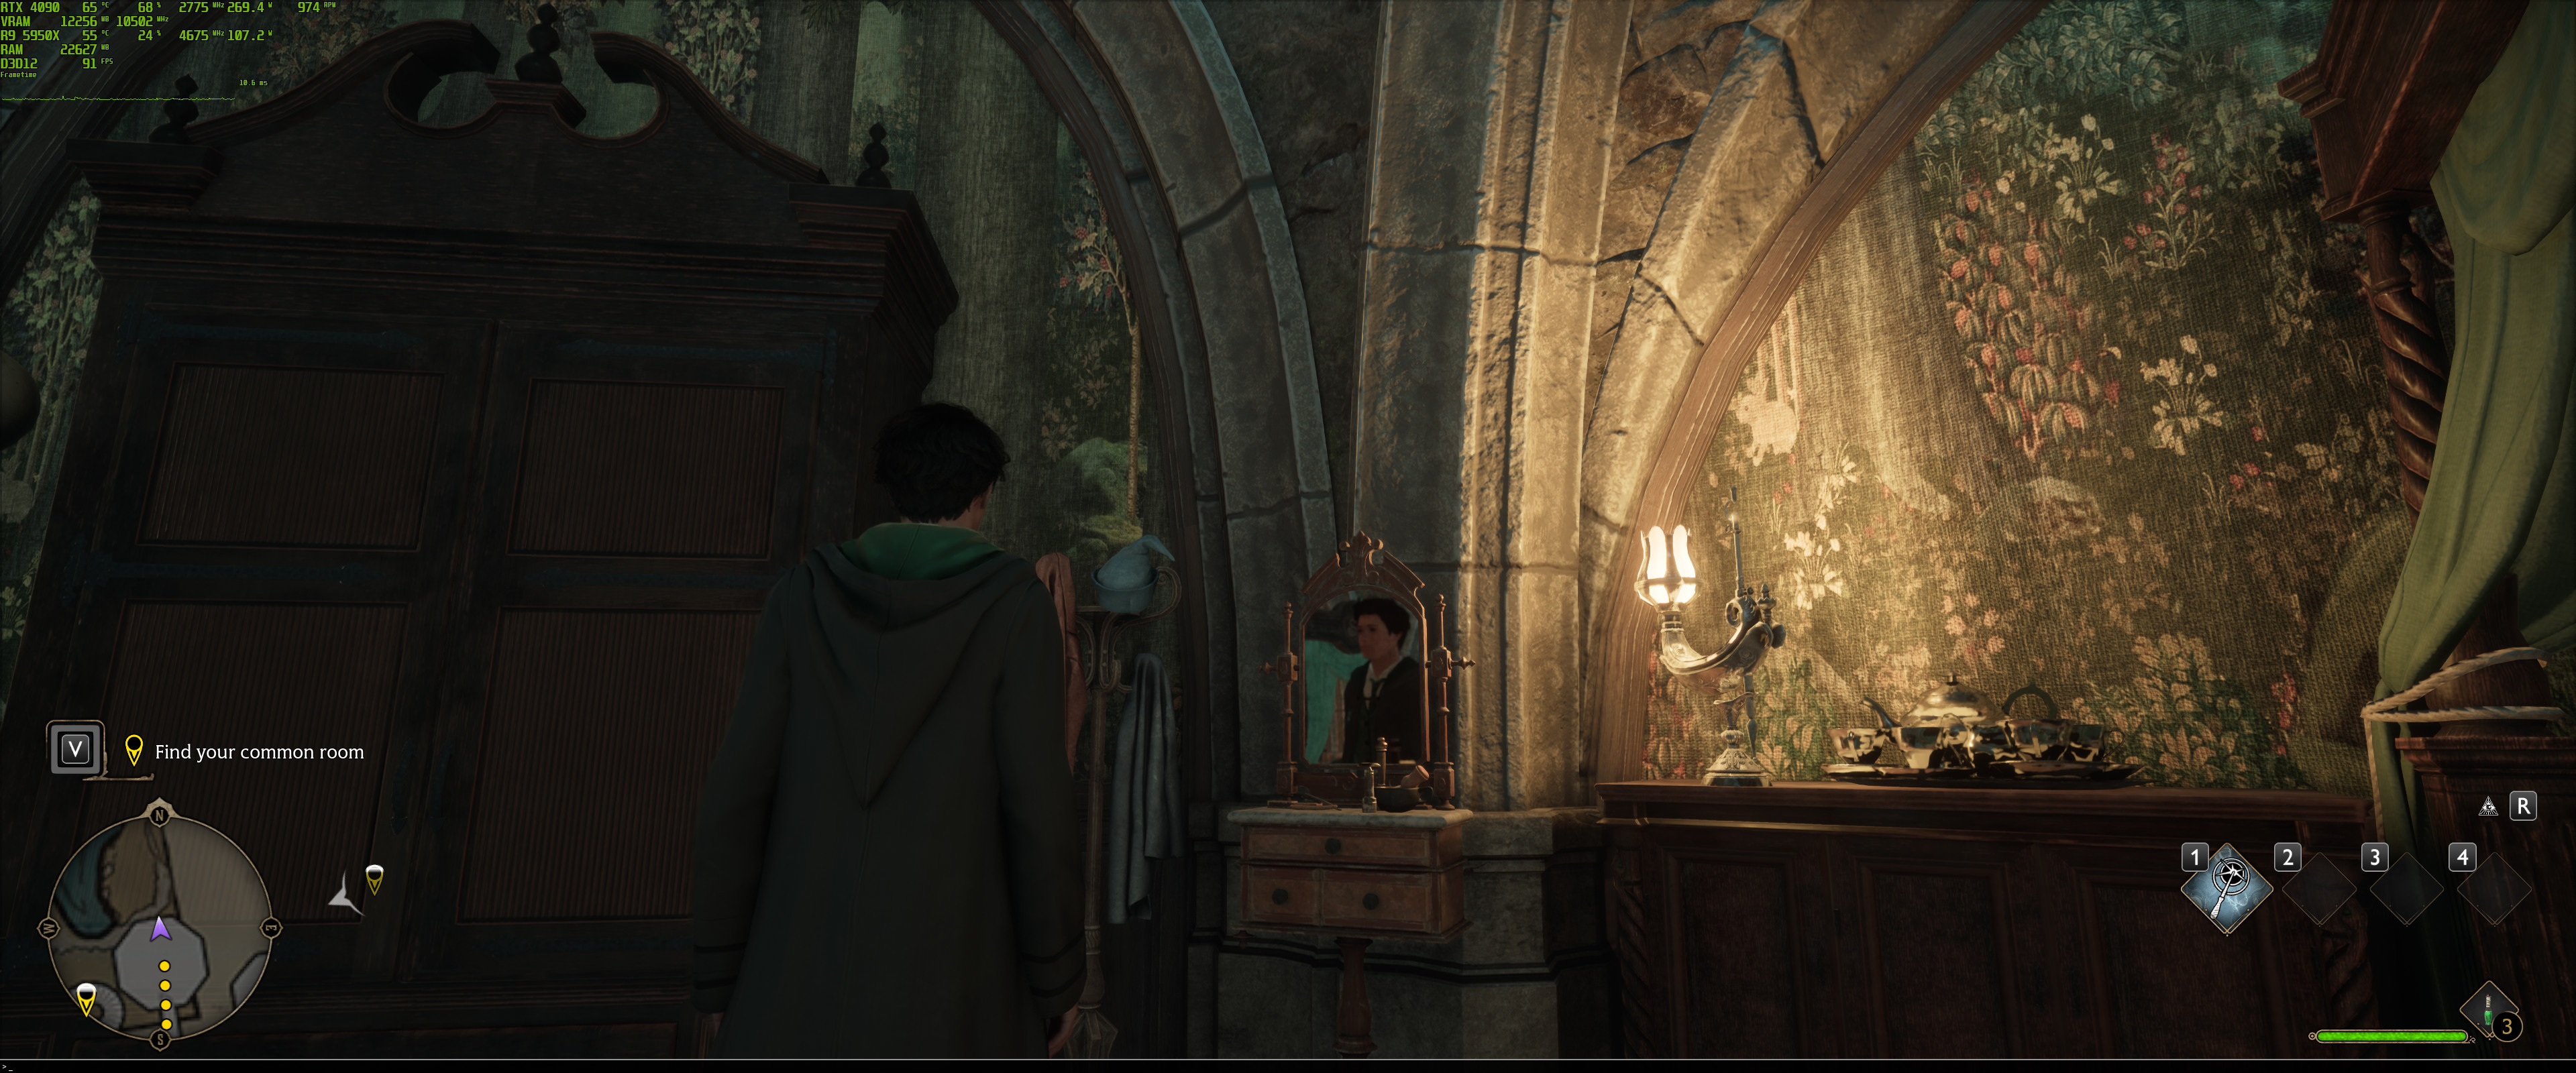 Hogwarts Legacy will have extensive support for ray tracing - OC3D